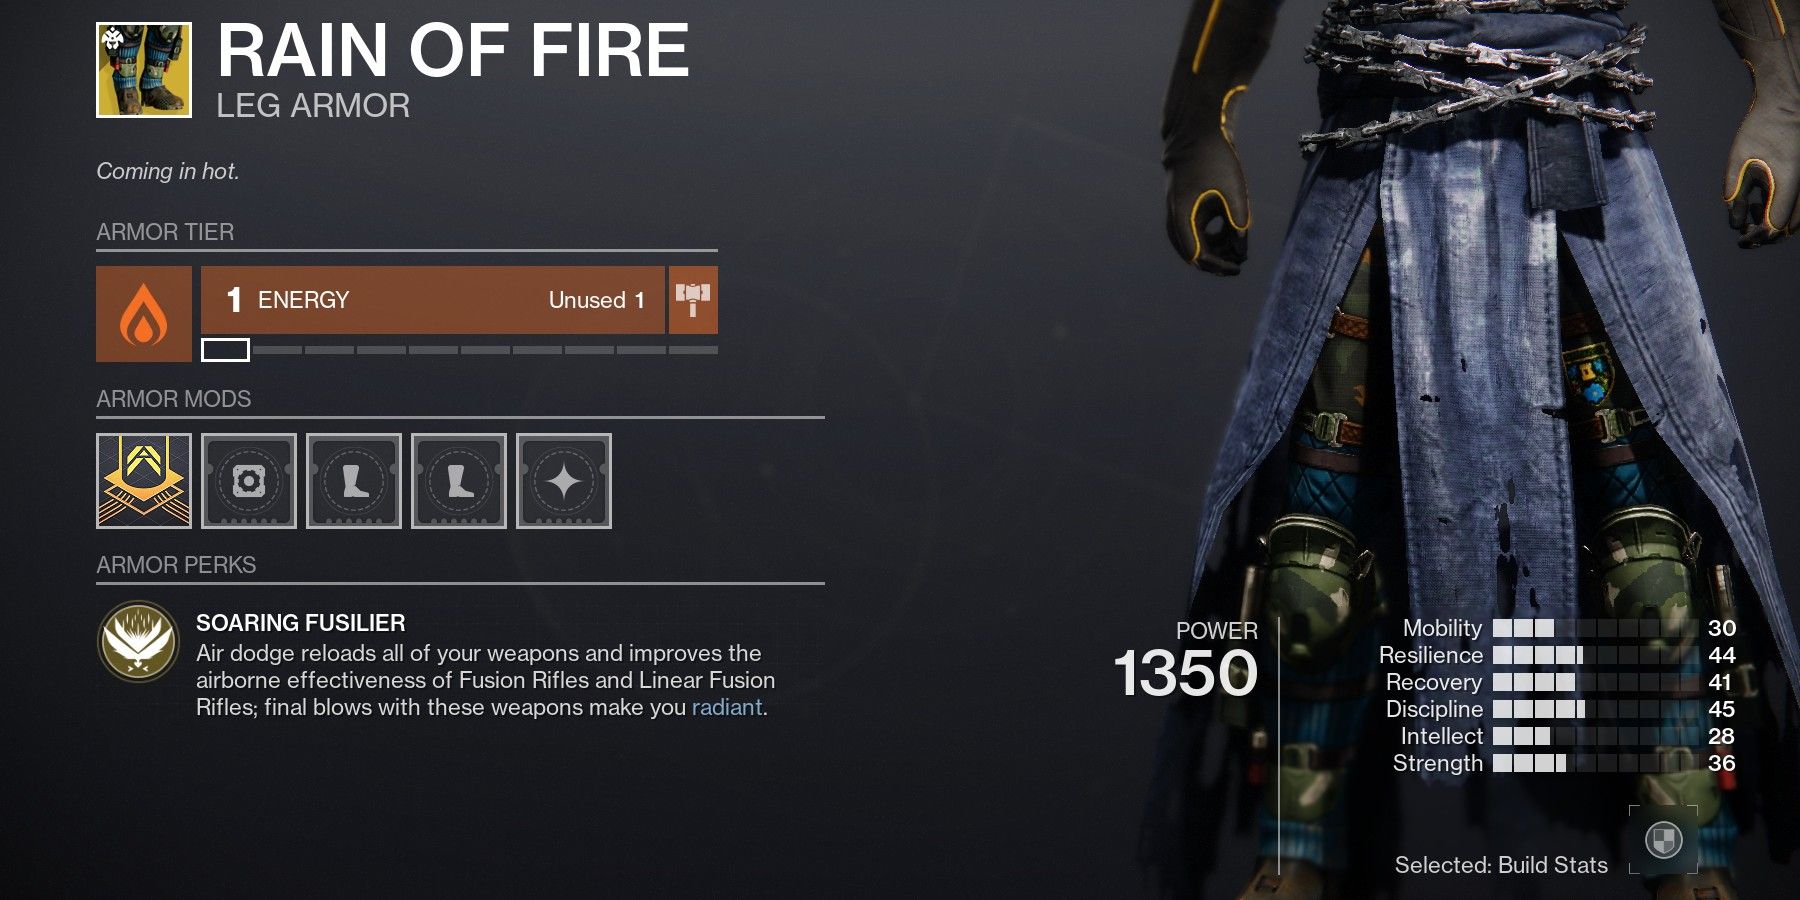 How to Get the Rain of Fire Exotic Leg Armor in Destiny 2